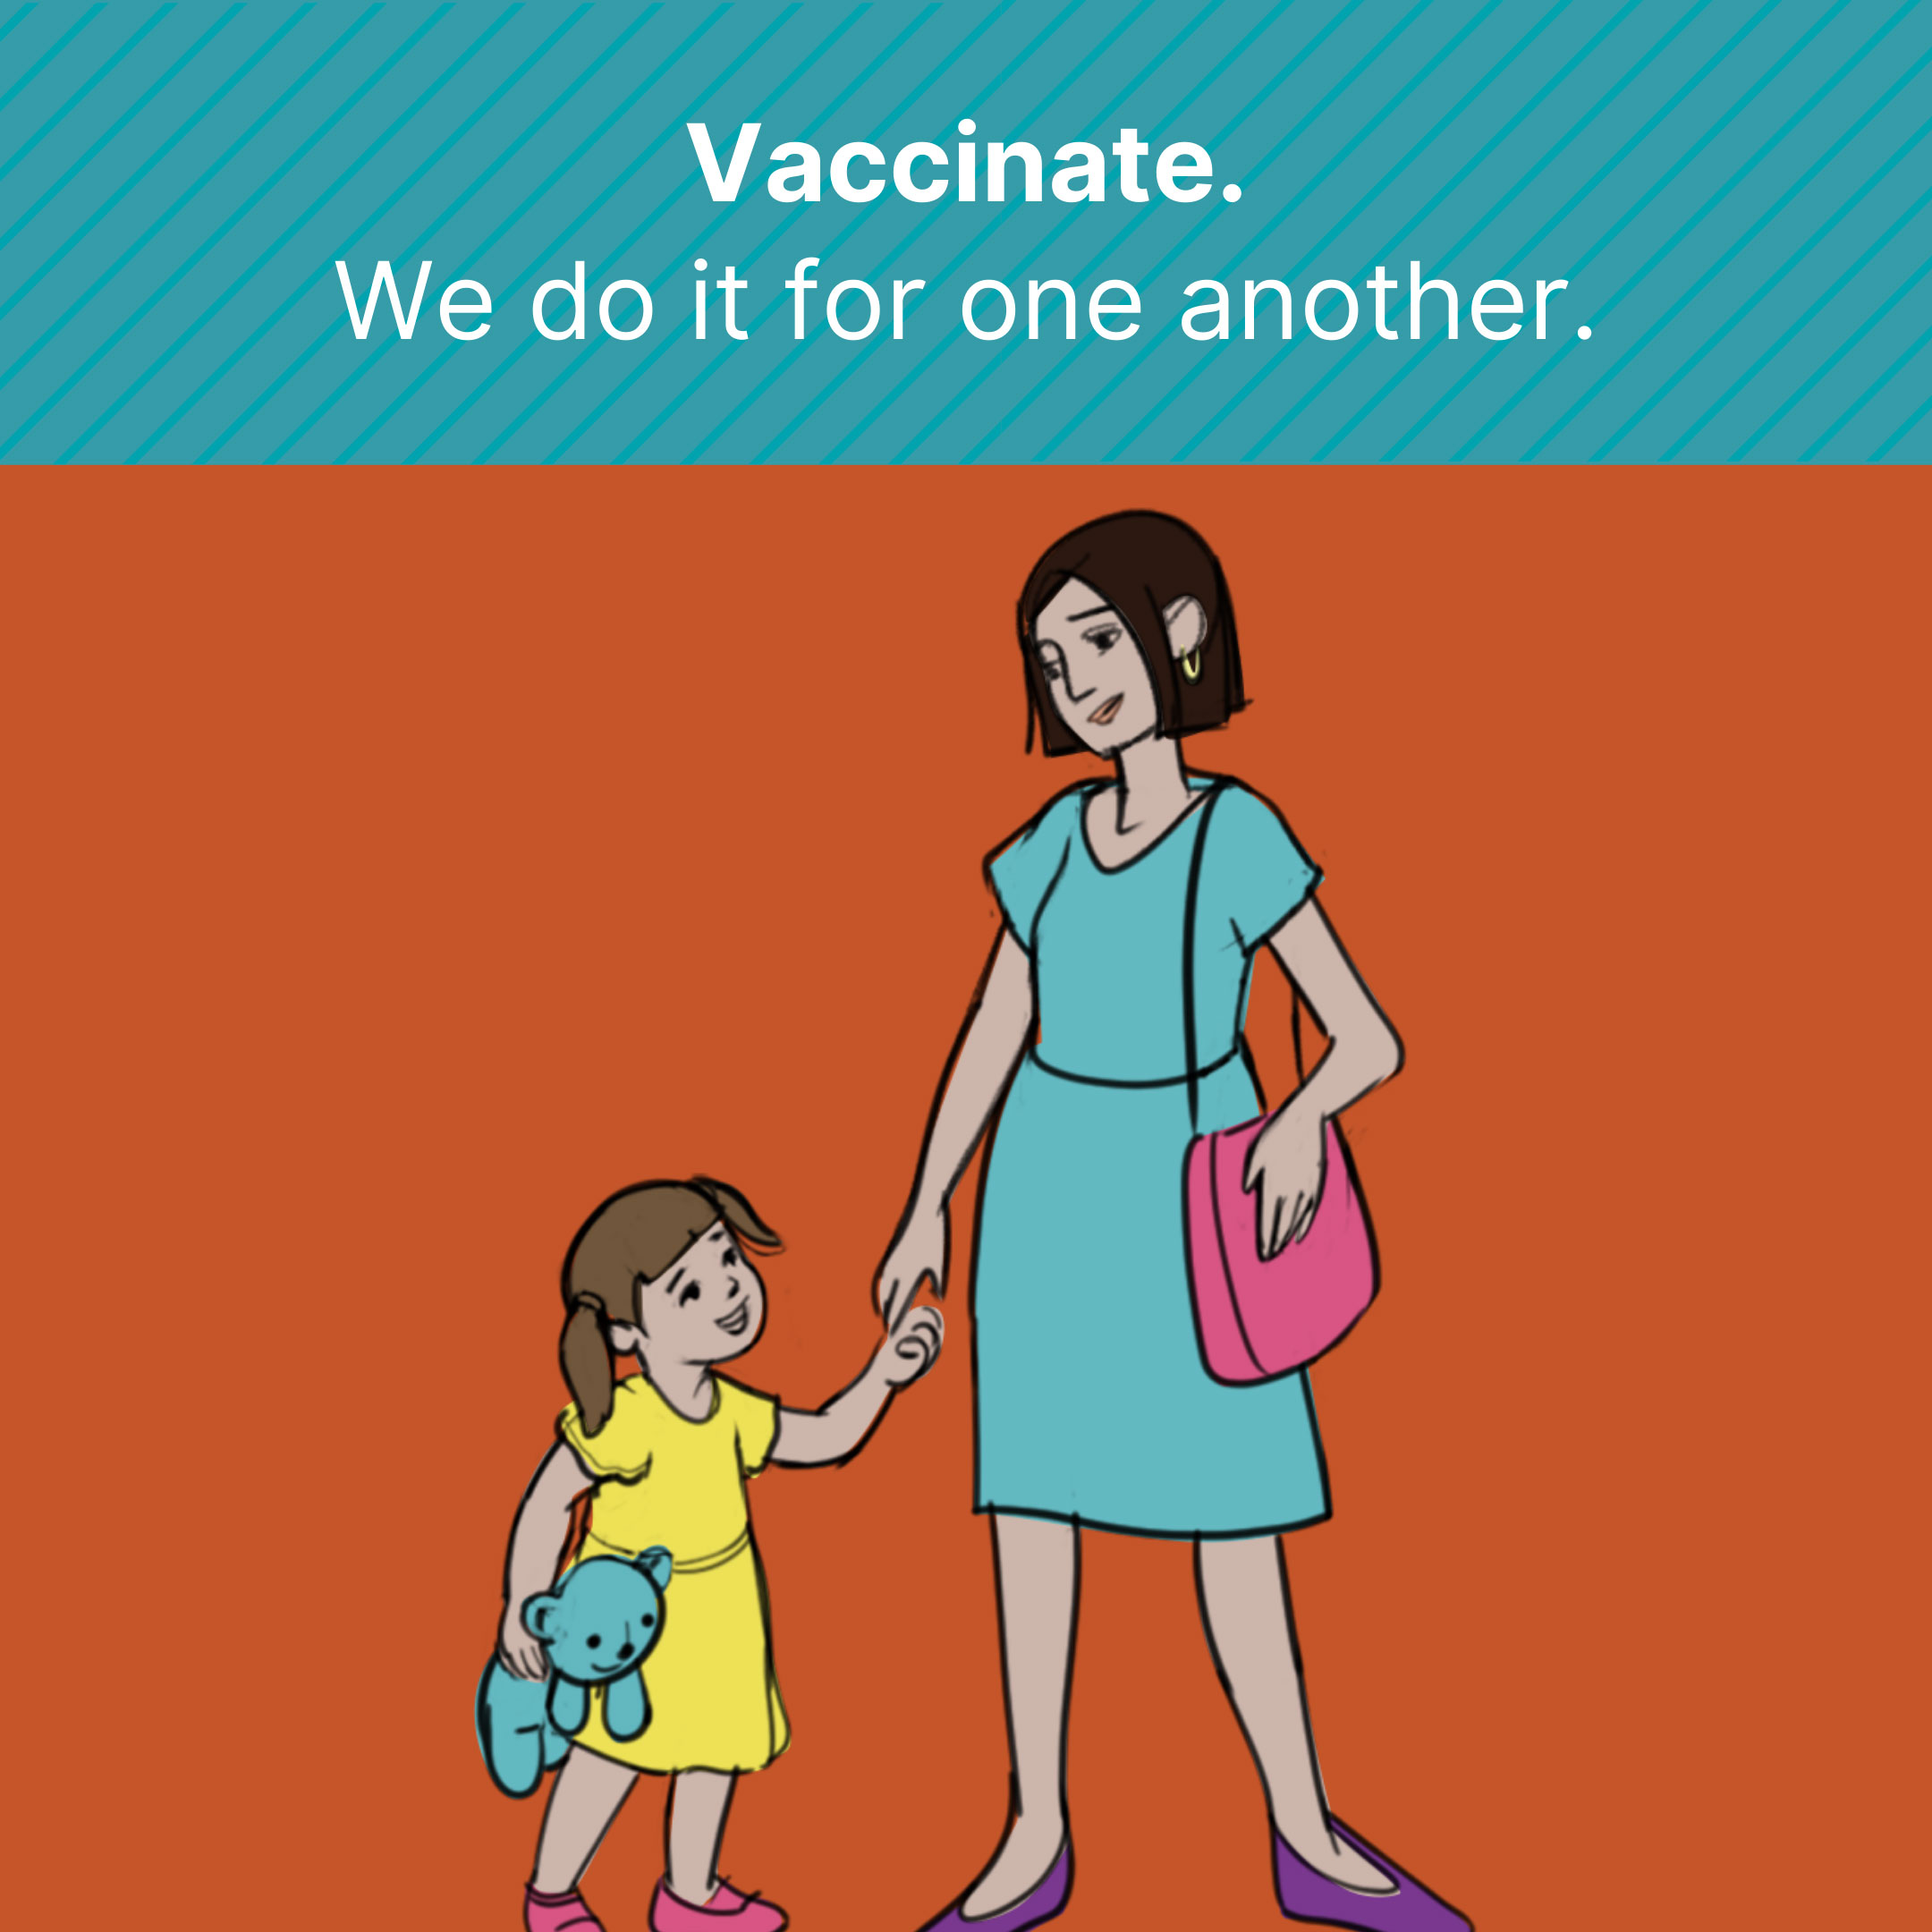 Lady and her daughter holding hands and looking at each other. Text says: Vaccinate. We do it for one another.